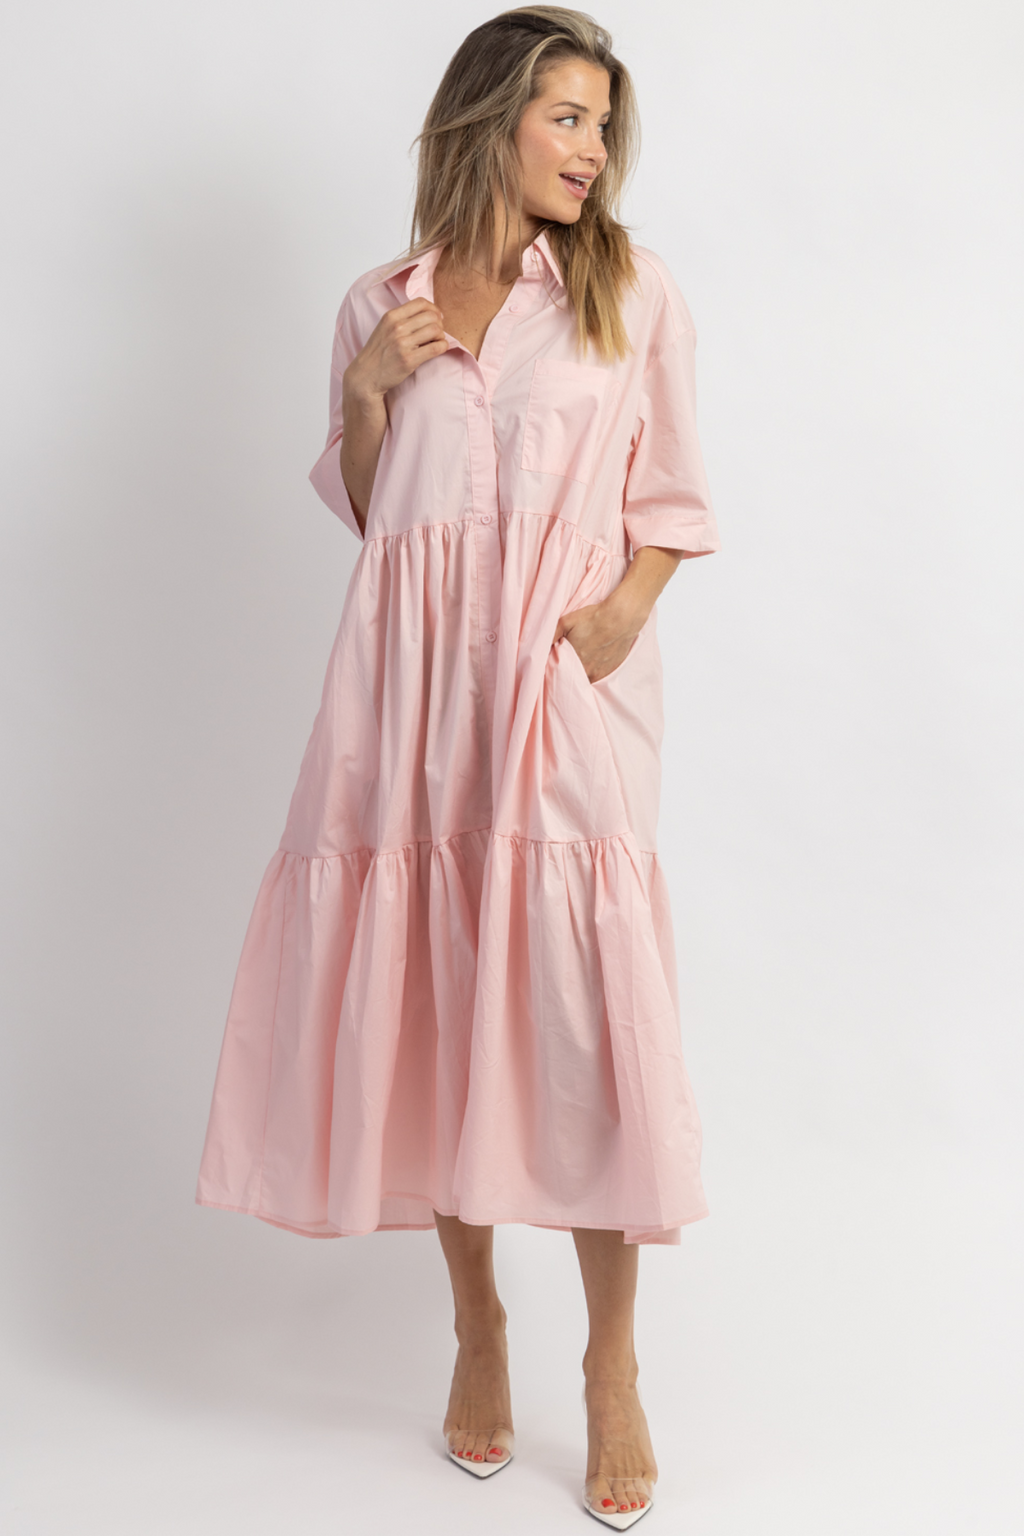 NOT A CLOUD BABY PINK TIERED DRESS